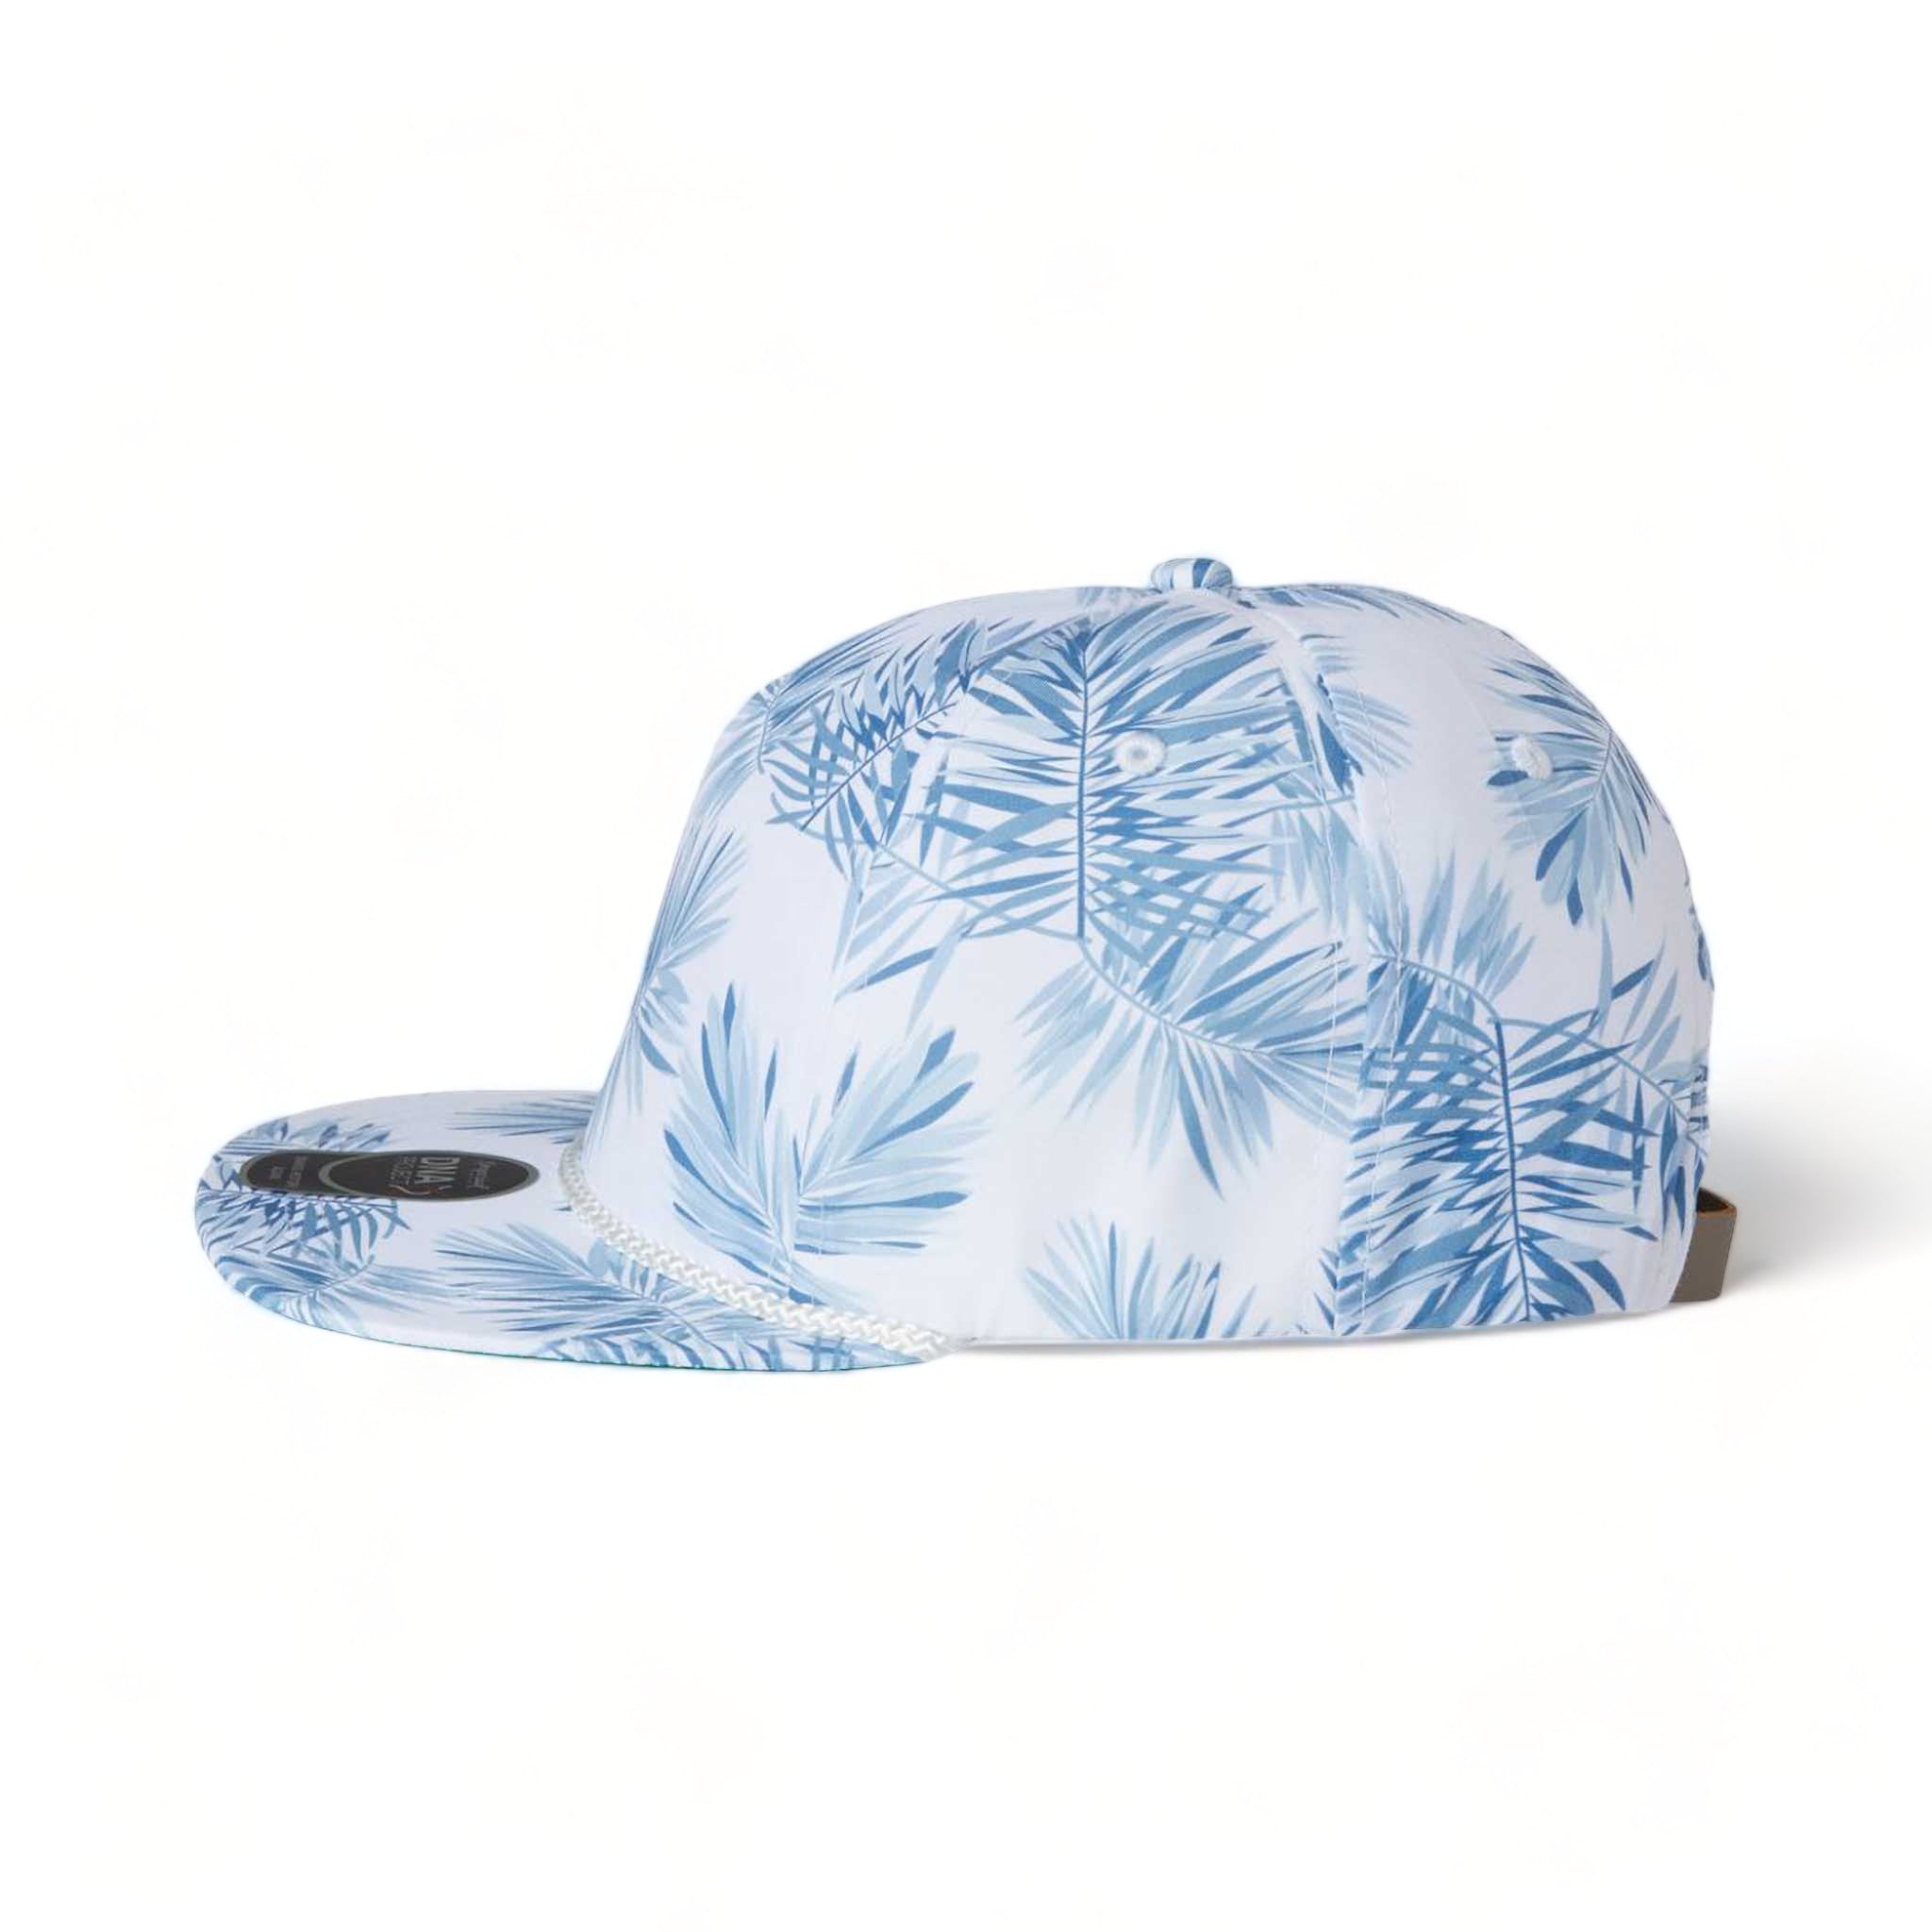 Side view of Imperial DNA010 custom hat in floral mist